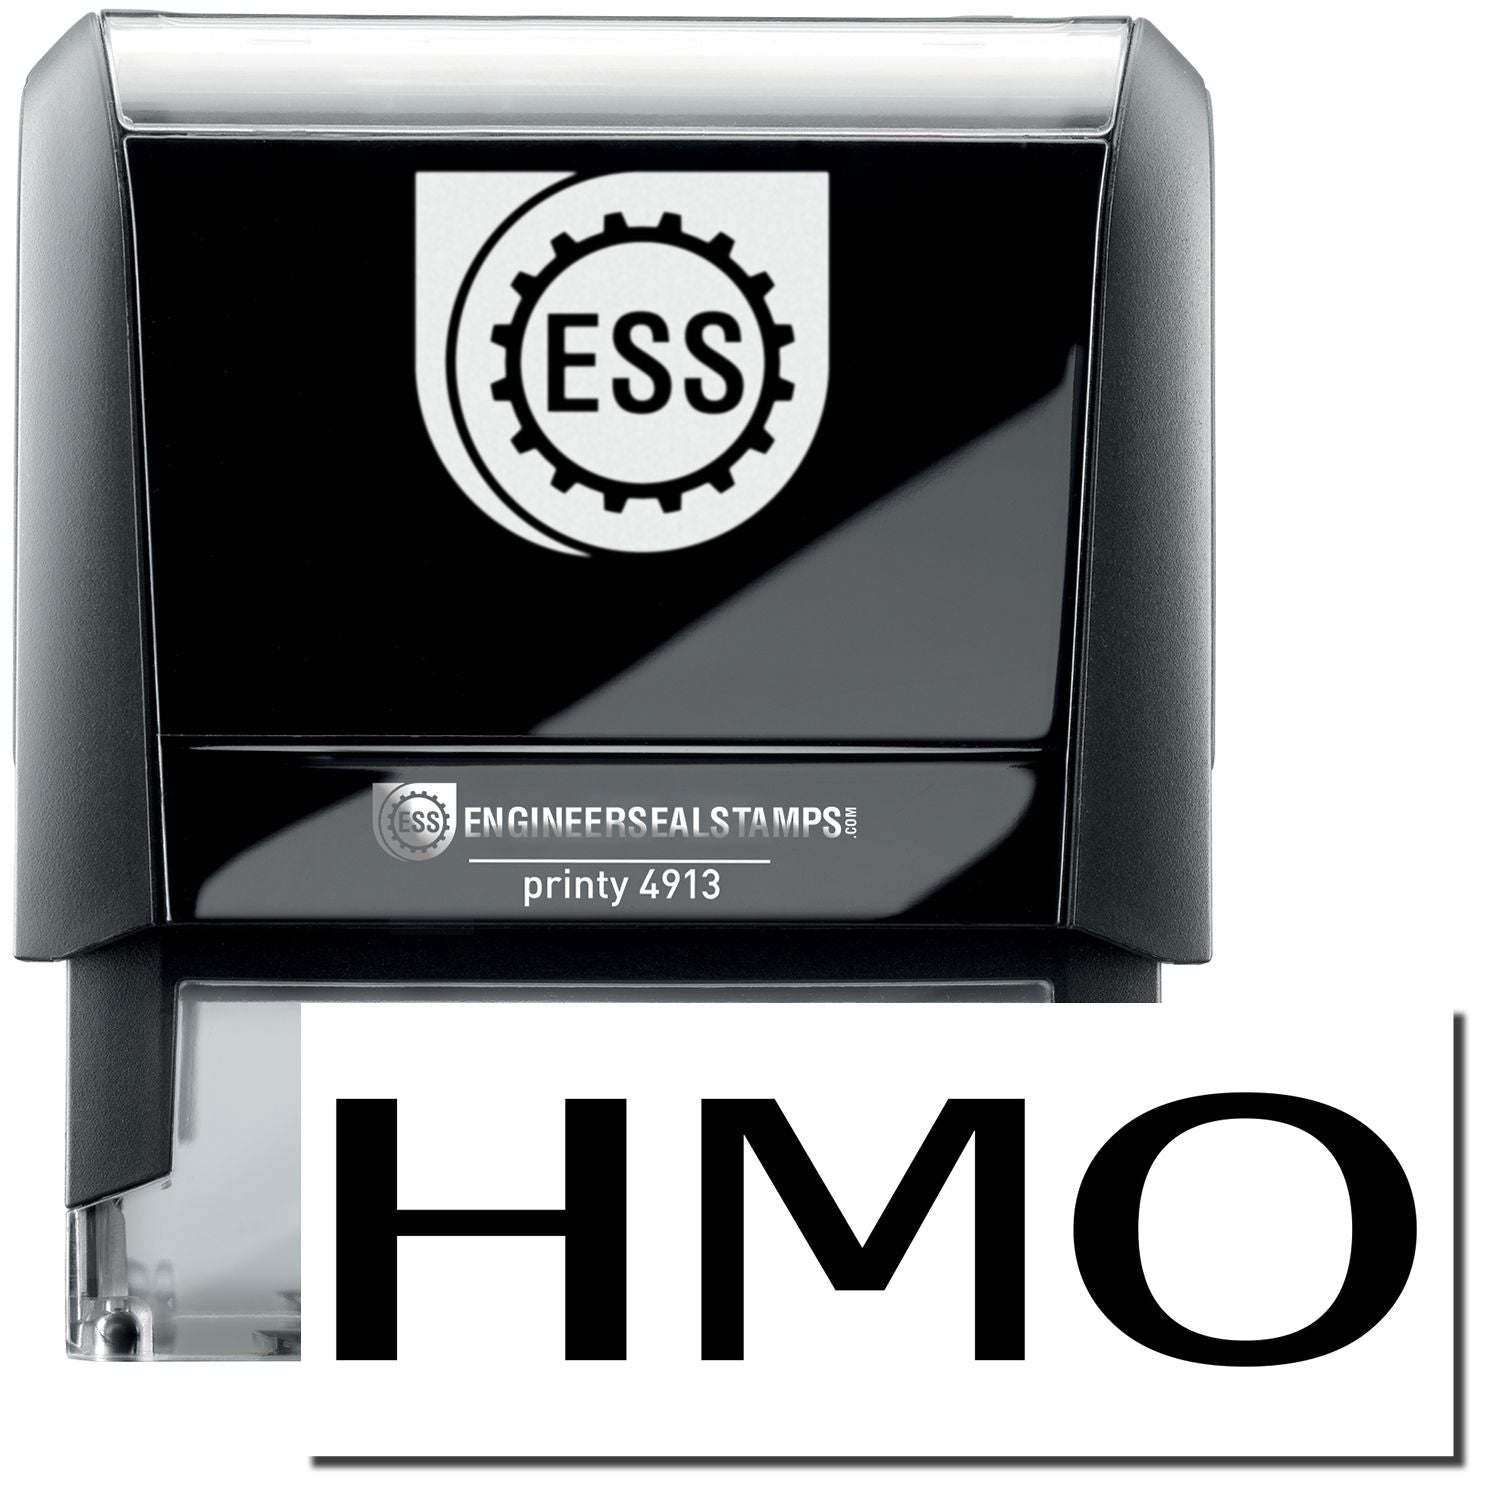 A self-inking stamp with a stamped image showing how the text "HMO" in a large bold font is displayed by it.